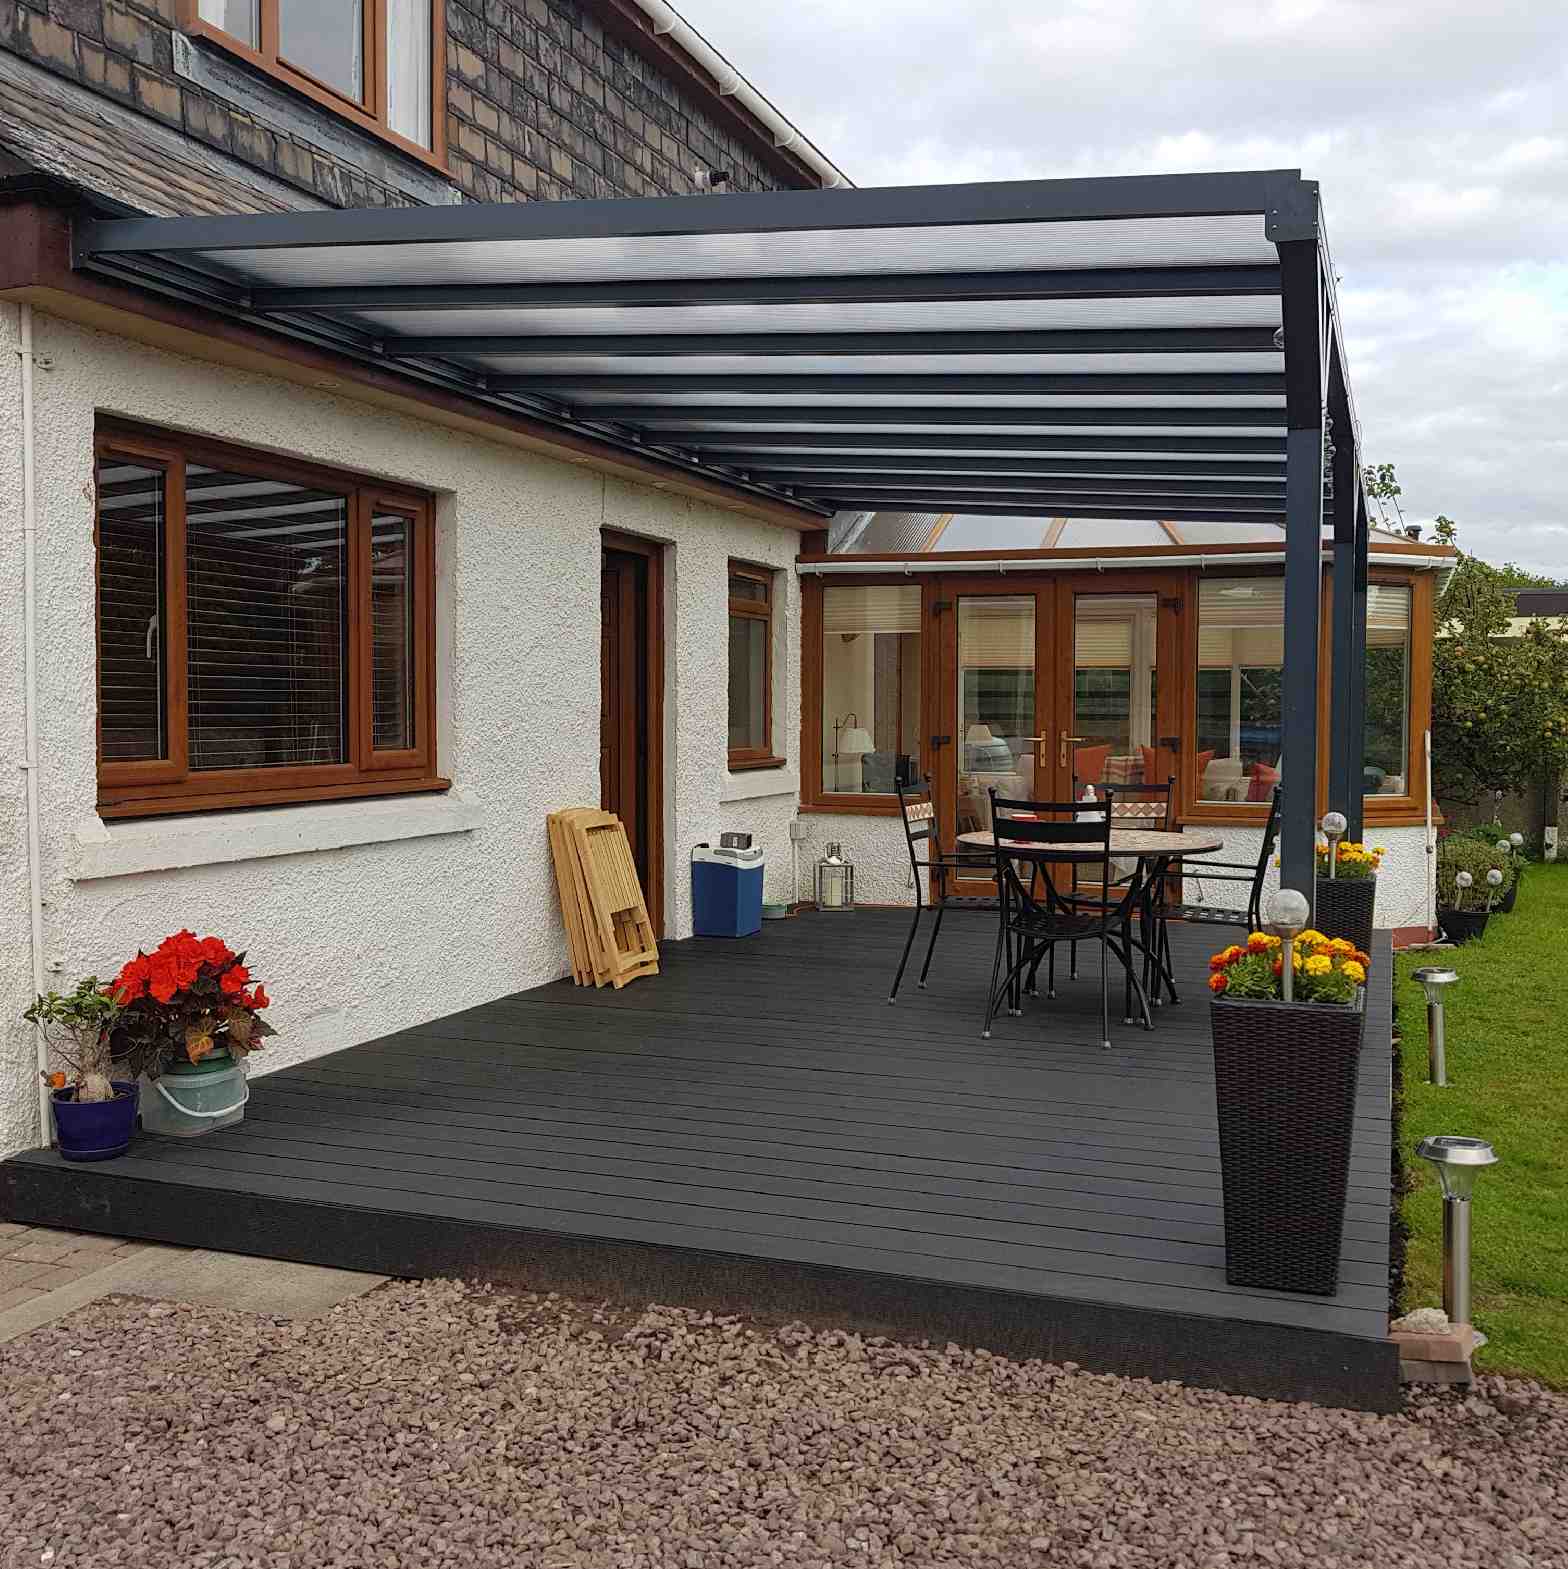 Buy Omega Verandah, Anthracite Grey, 16mm Polycarbonate Glazing - 4.9m (W) x 4.0m (P), (3) Supporting Posts online today